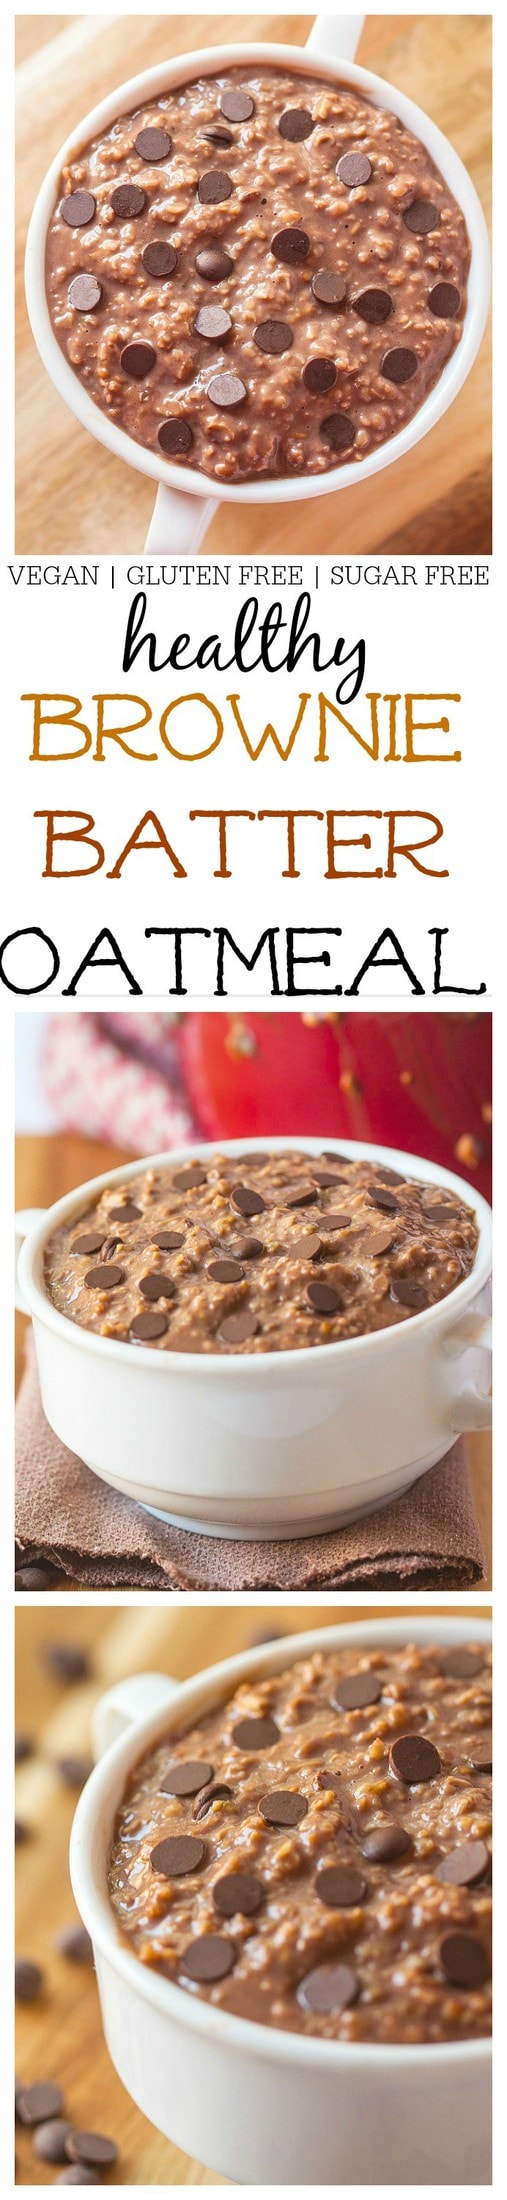 The Ultimate {Healthy!} Brownie Batter Oatmeal- This healthy vegan brownie batter oatmeal is just like having dessert for breakfast and requires no effort but some simple prep the night before! High in protein, gluten free and with a sugar free option- Give your breakfast a sweet start! @thebigmansworld - thebigmansworld.com